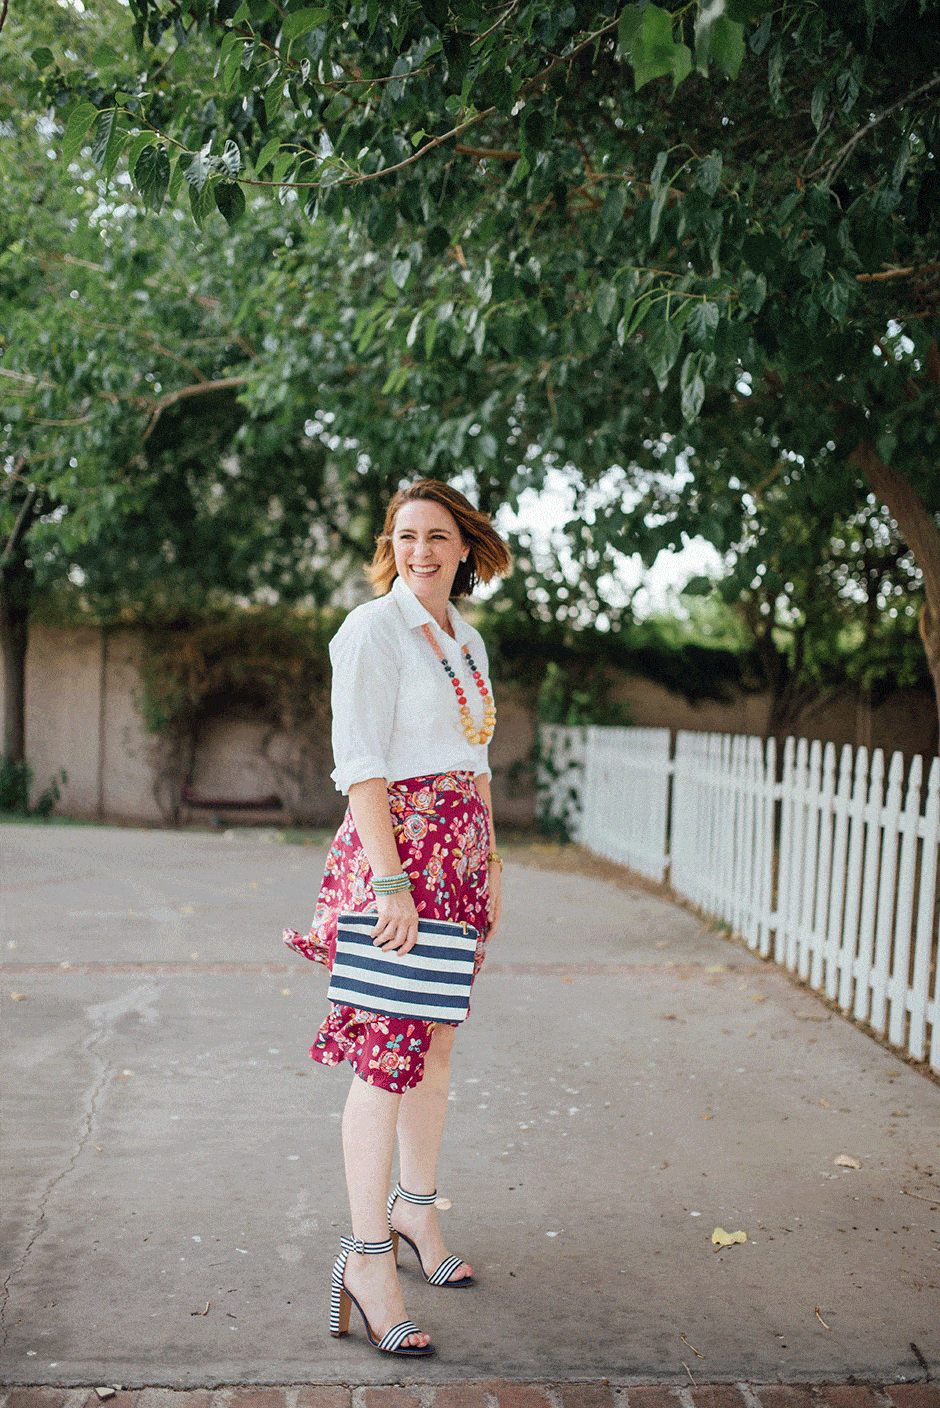 Wrap skirts are everywhere! With ruffles or without; in mini, midi and maxi lengths; as a true wrap or faux - there's no escaping this trend and we're not mad about it. Read on to get the pattern and fabric details and learn how to sew your own floral wrap skirt! Sew a wrap skirt today with this pattern.